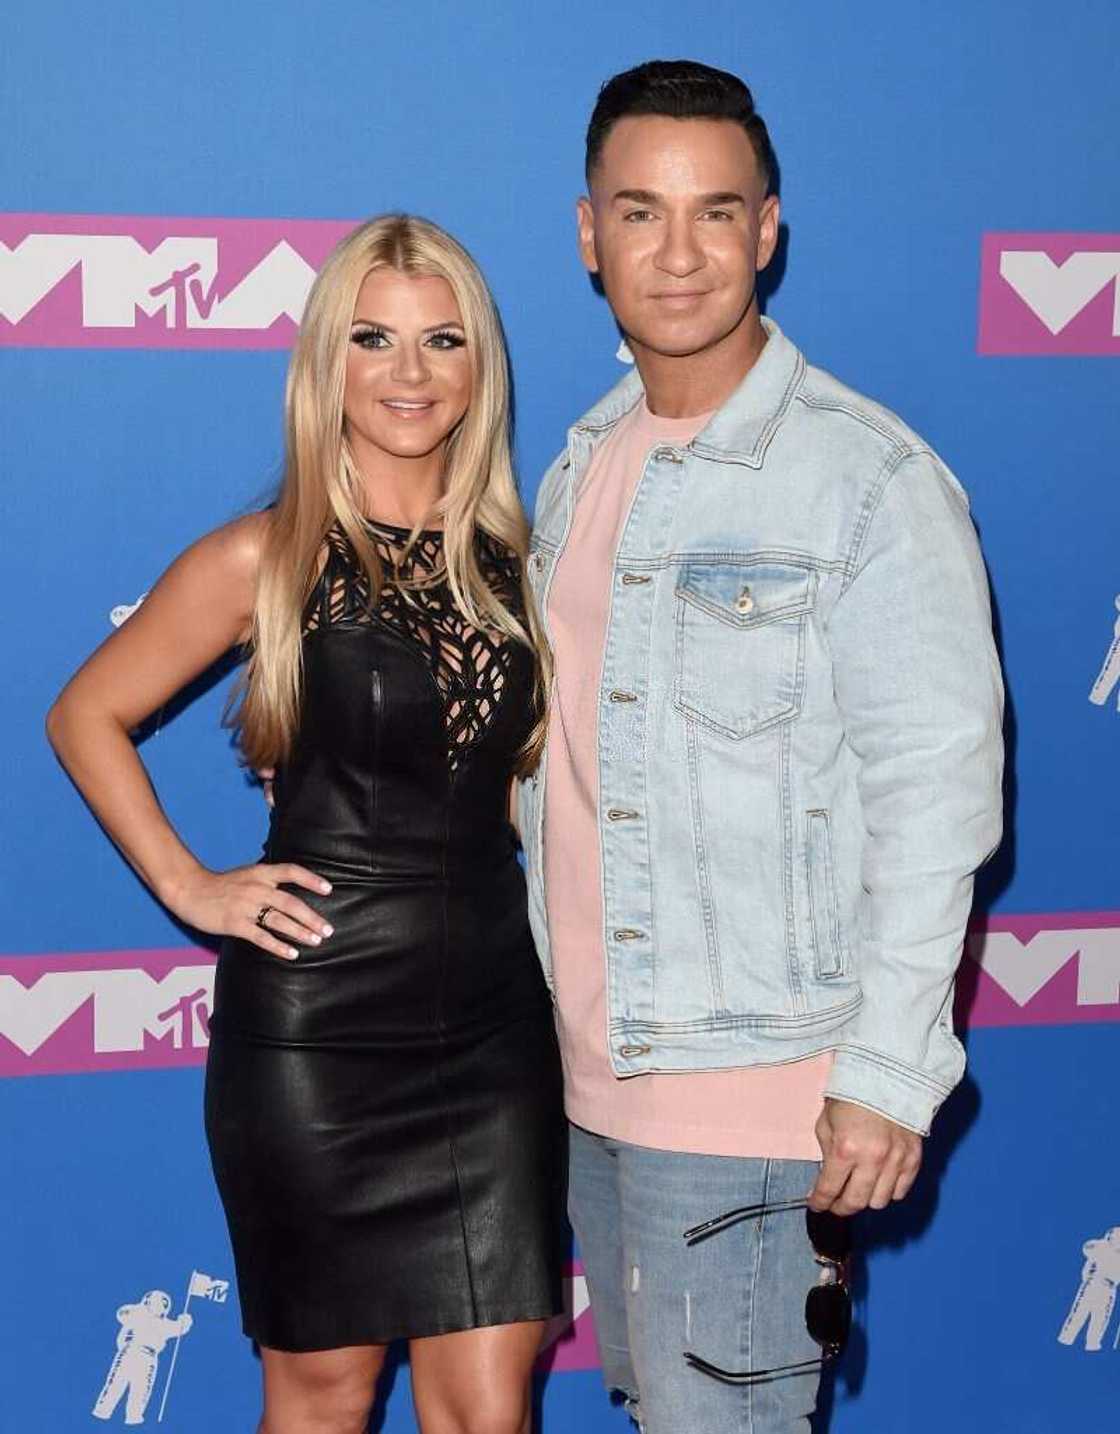 Mike the Situation’s net worth, wife